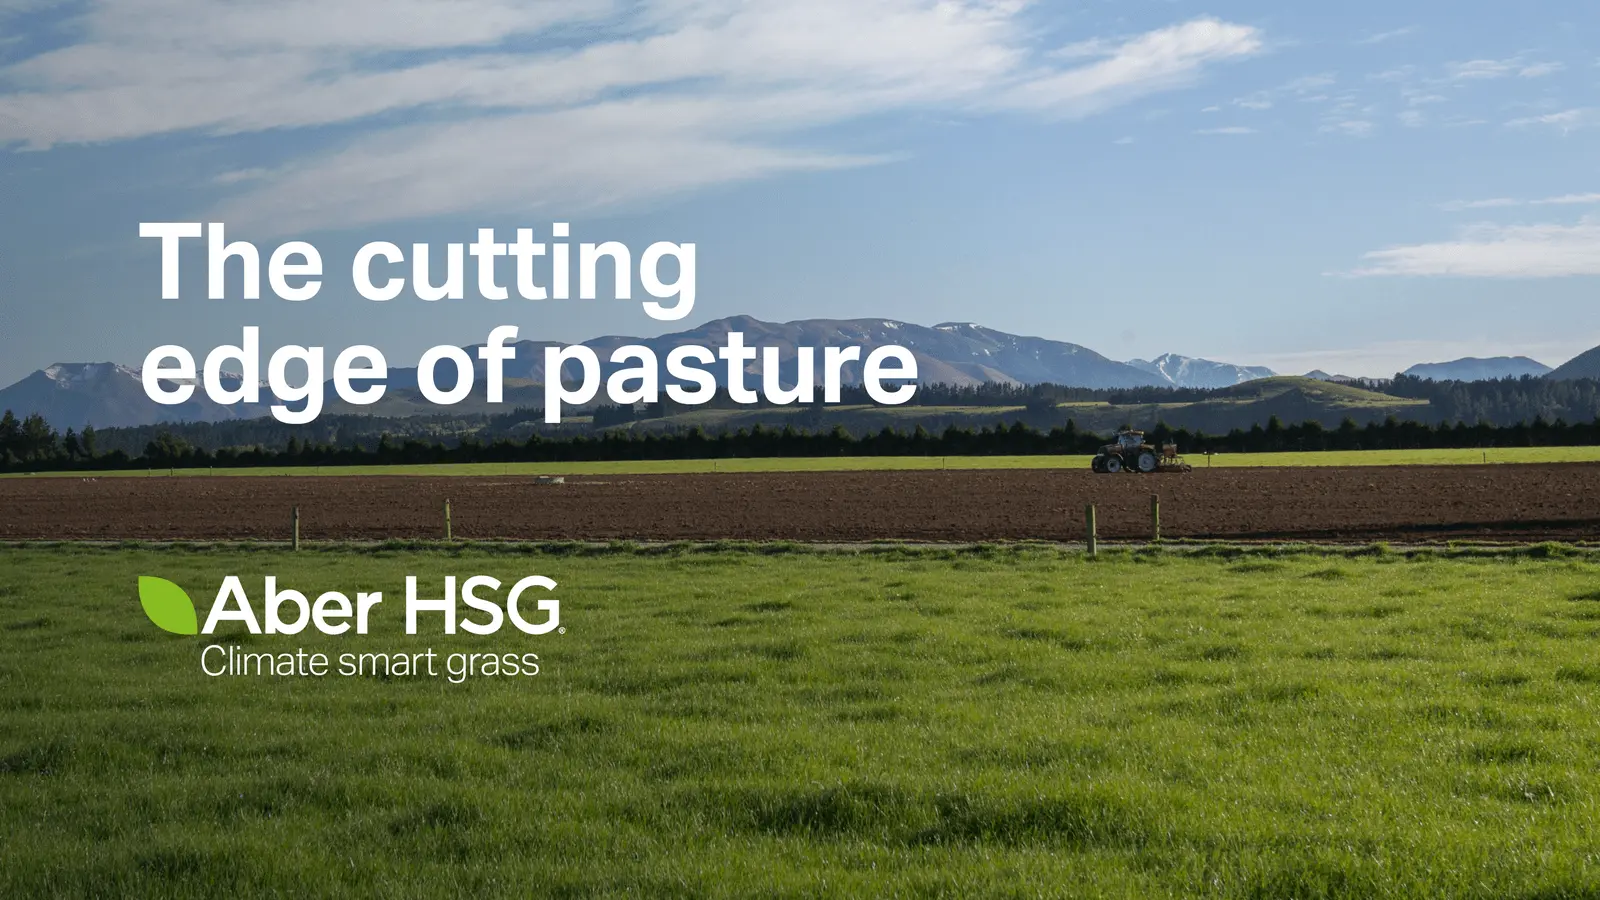 germinal's aber high sugar grasses are at the cutting edge of pasture options in New Zealand